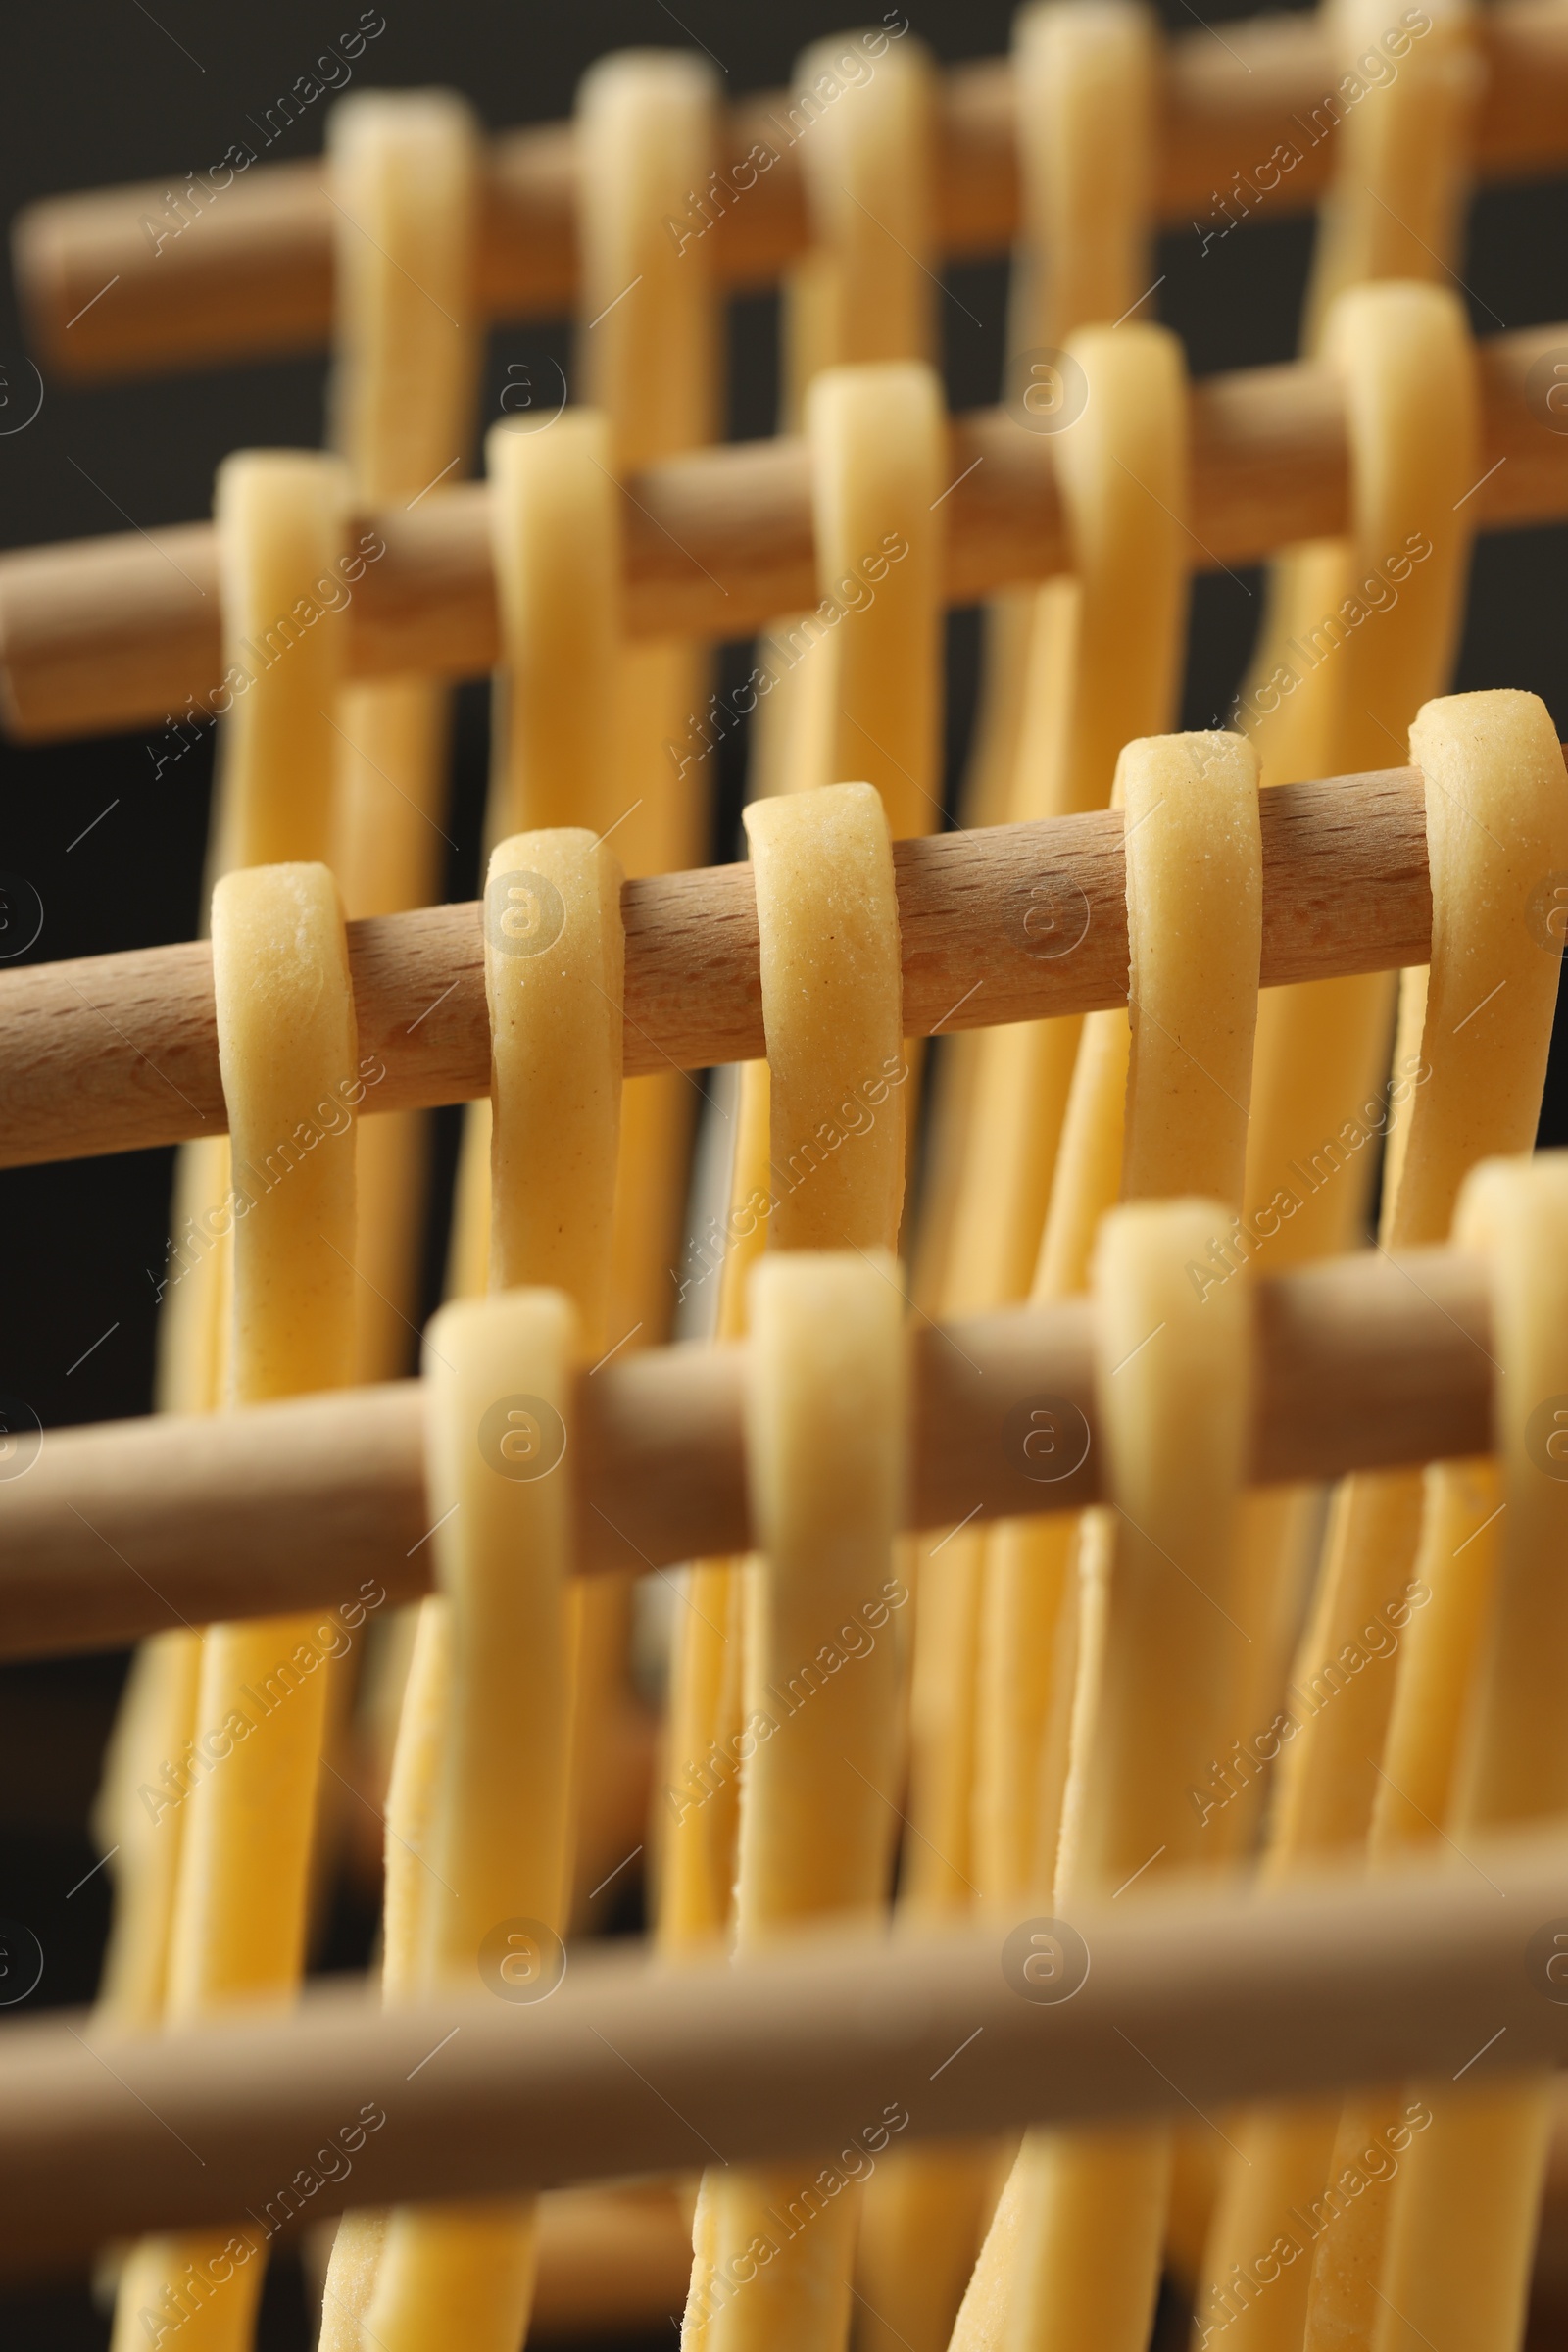 Photo of Homemade pasta drying on wooden rack against dark background, closeup